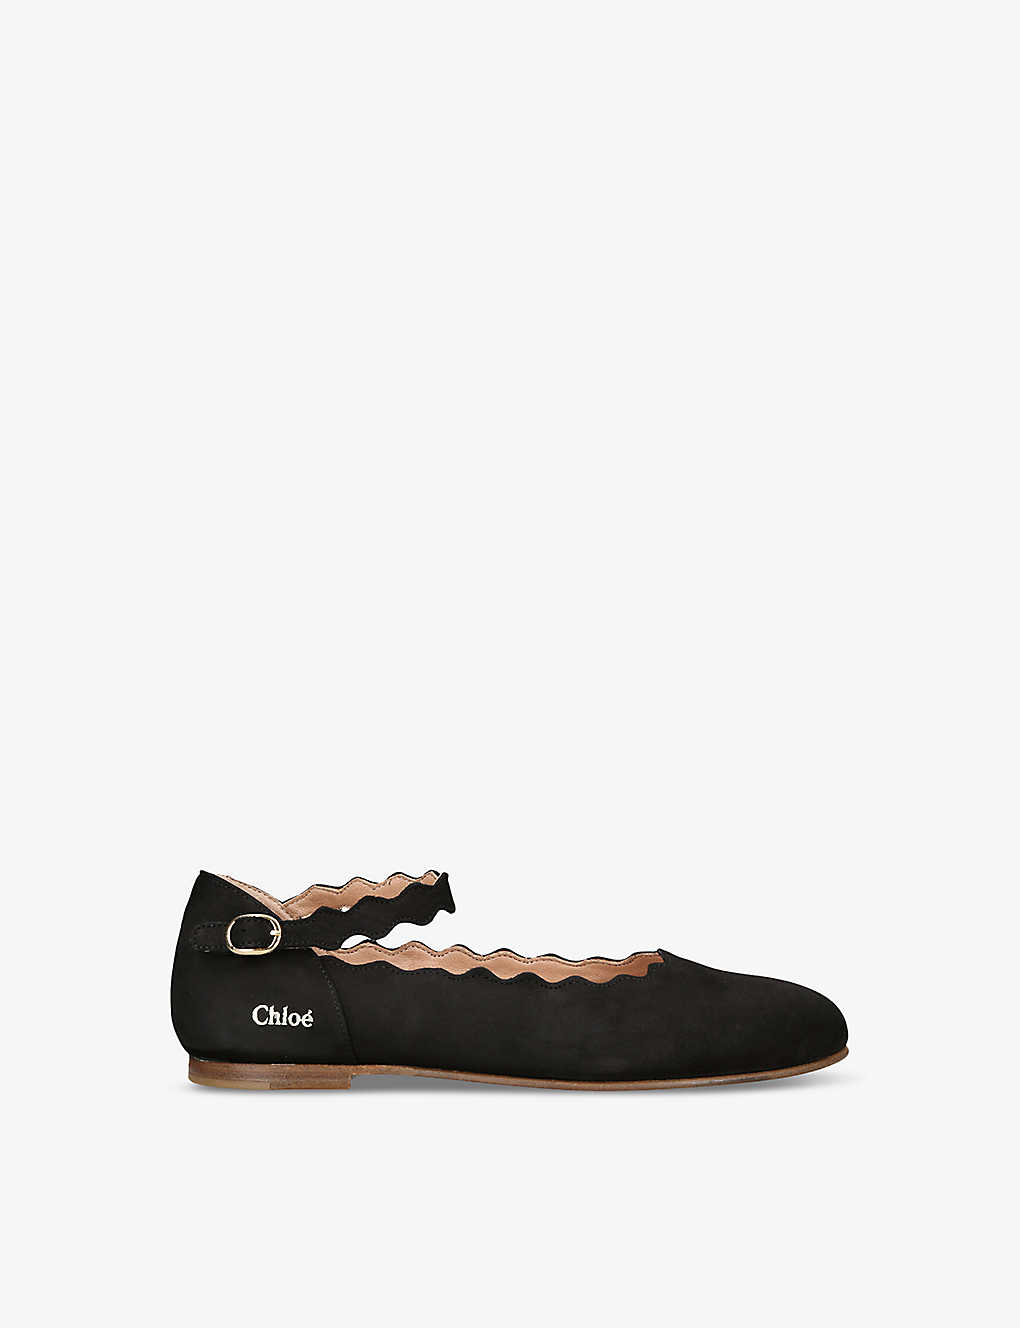 Chloé Kids' Leather Scalloped Ballet Flats In Black